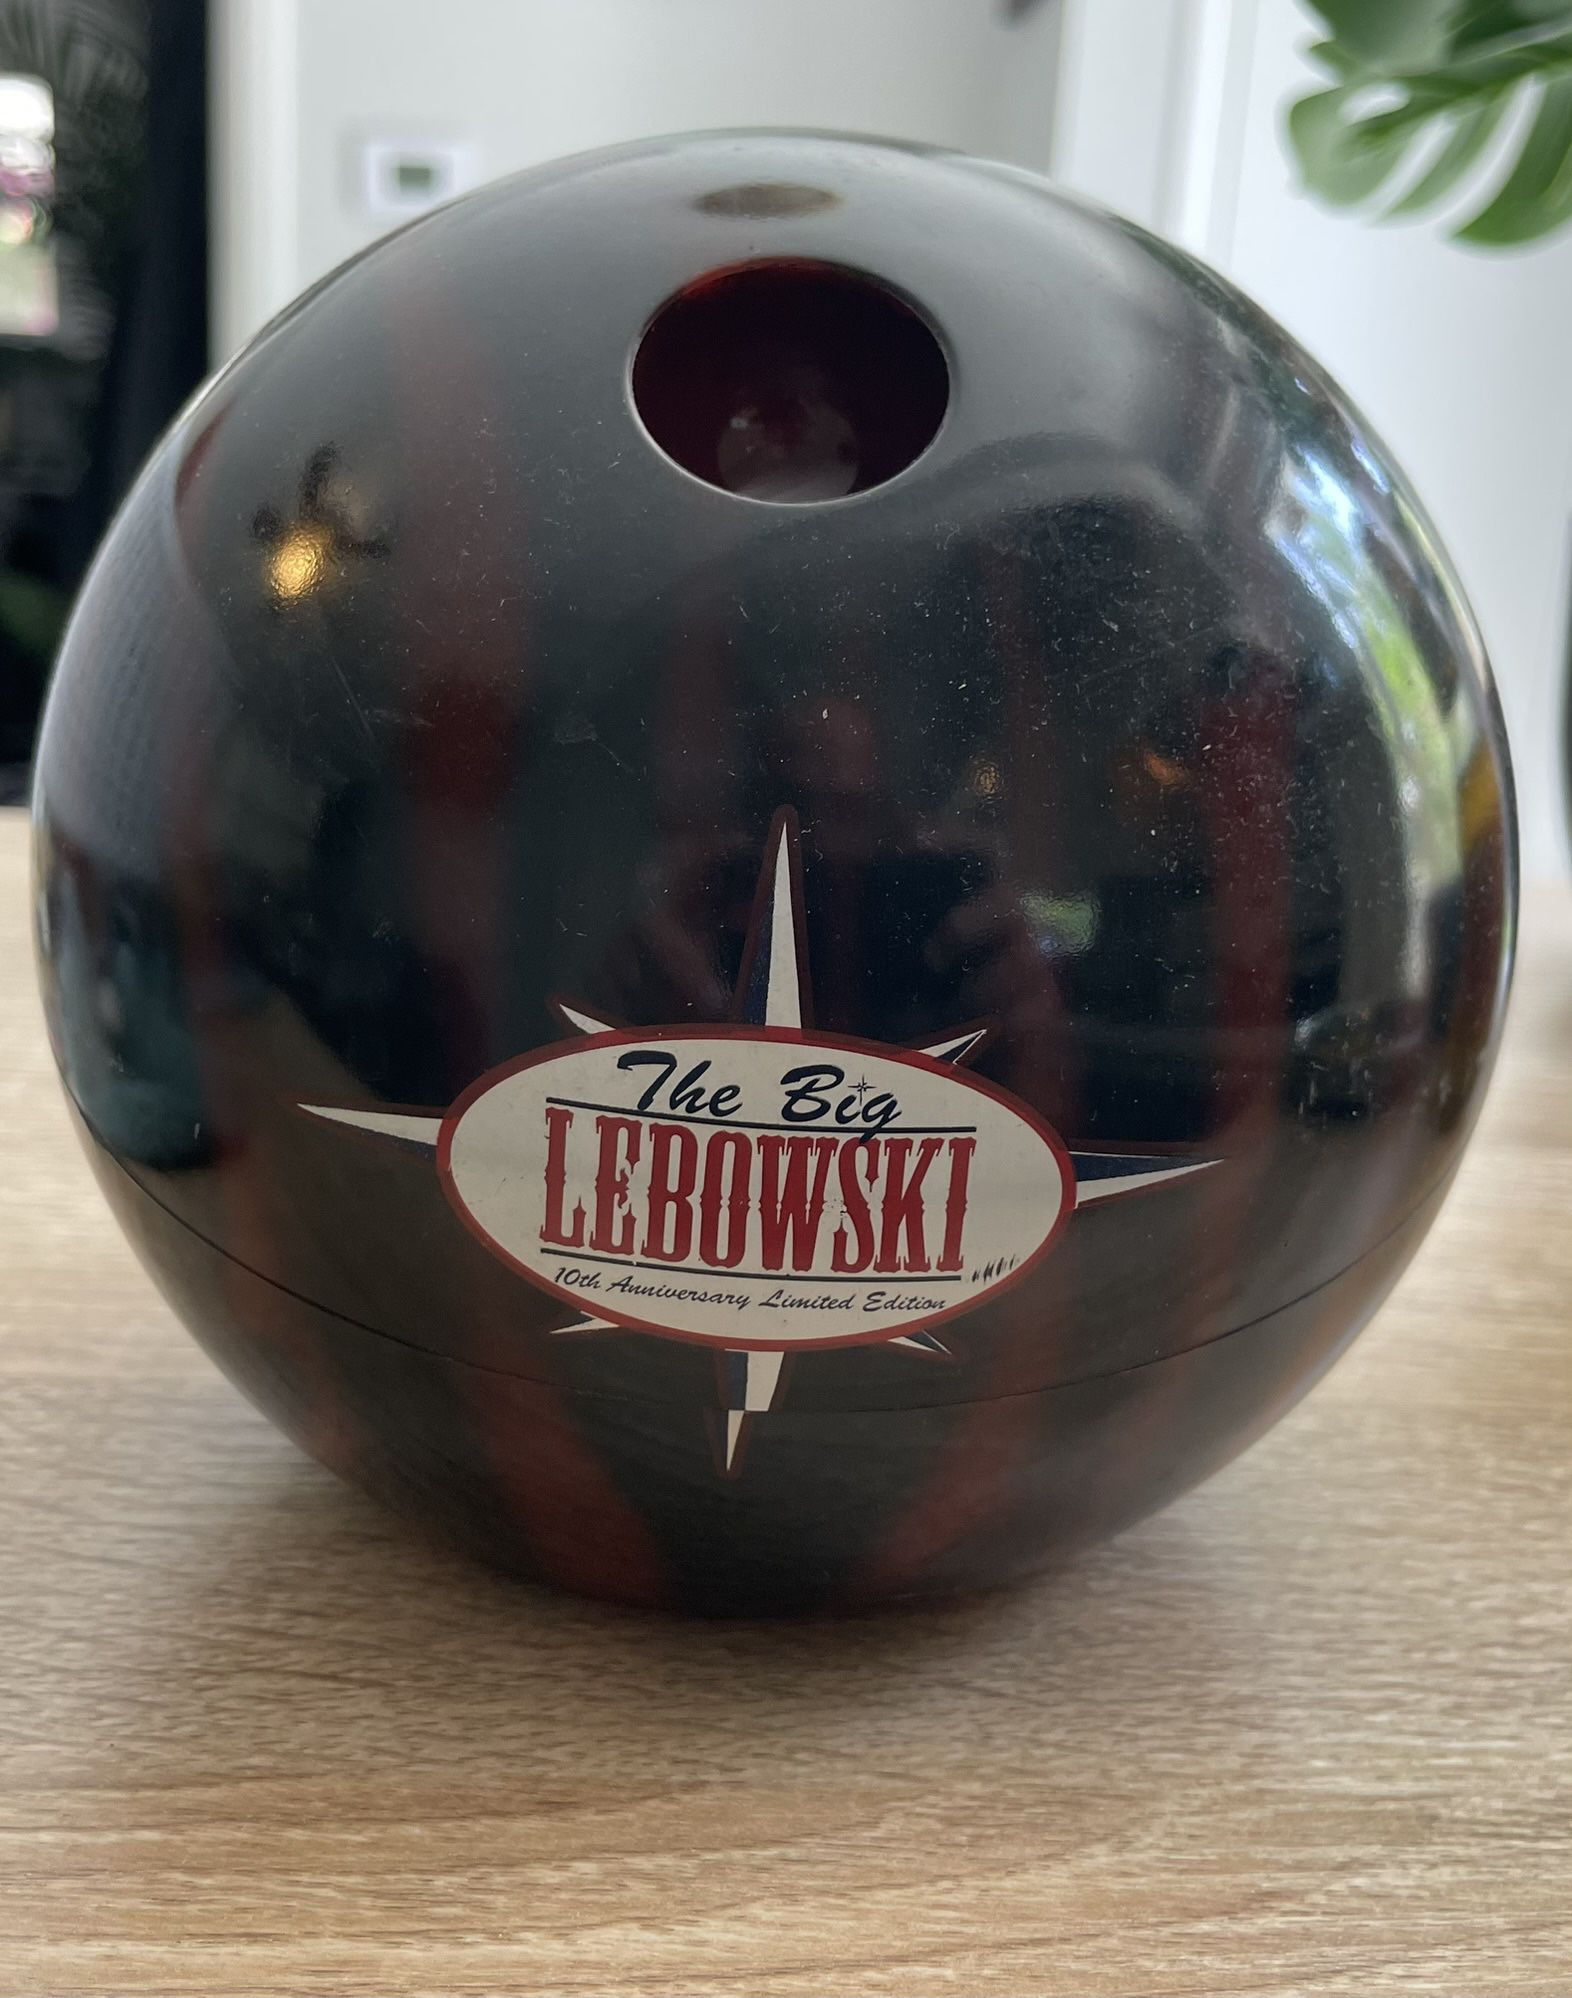 “The Big Lebowski” 10th Anniversary 2–DVD Limited Edition in bowling ball case